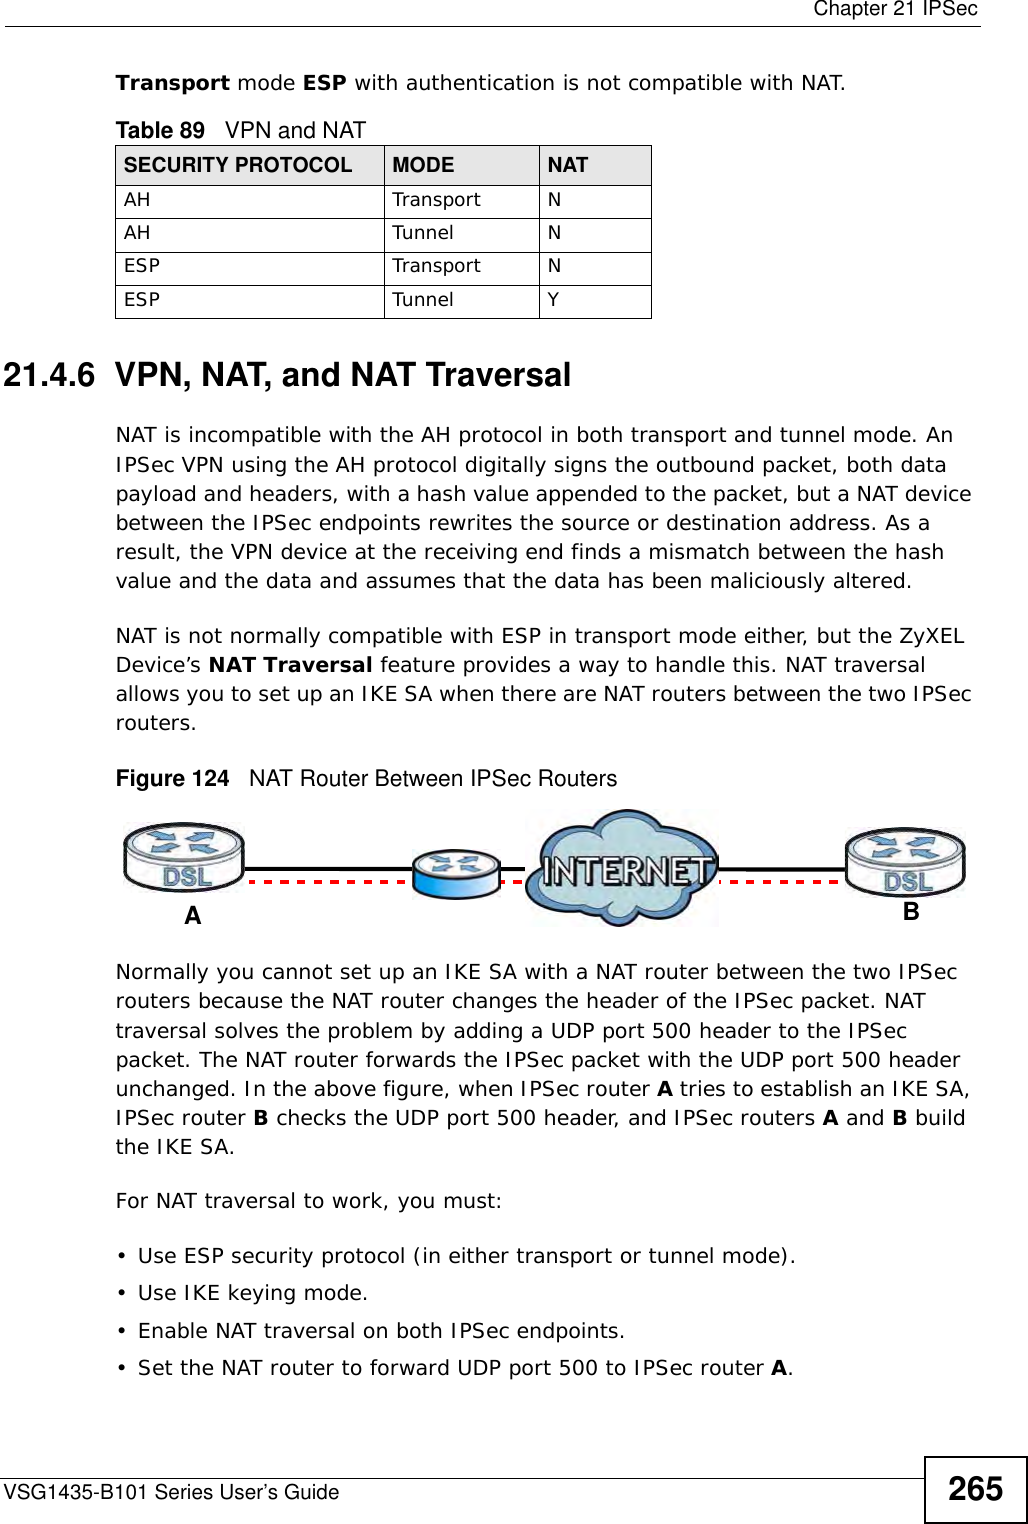  Chapter 21 IPSecVSG1435-B101 Series User’s Guide 265Transport mode ESP with authentication is not compatible with NAT.21.4.6  VPN, NAT, and NAT TraversalNAT is incompatible with the AH protocol in both transport and tunnel mode. An IPSec VPN using the AH protocol digitally signs the outbound packet, both data payload and headers, with a hash value appended to the packet, but a NAT device between the IPSec endpoints rewrites the source or destination address. As a result, the VPN device at the receiving end finds a mismatch between the hash value and the data and assumes that the data has been maliciously altered.NAT is not normally compatible with ESP in transport mode either, but the ZyXEL Device’s NAT Traversal feature provides a way to handle this. NAT traversal allows you to set up an IKE SA when there are NAT routers between the two IPSec routers.Figure 124   NAT Router Between IPSec RoutersNormally you cannot set up an IKE SA with a NAT router between the two IPSec routers because the NAT router changes the header of the IPSec packet. NAT traversal solves the problem by adding a UDP port 500 header to the IPSec packet. The NAT router forwards the IPSec packet with the UDP port 500 header unchanged. In the above figure, when IPSec router A tries to establish an IKE SA, IPSec router B checks the UDP port 500 header, and IPSec routers A and B build the IKE SA.For NAT traversal to work, you must:• Use ESP security protocol (in either transport or tunnel mode).•Use IKE keying mode.• Enable NAT traversal on both IPSec endpoints.• Set the NAT router to forward UDP port 500 to IPSec router A.Table 89   VPN and NATSECURITY PROTOCOL MODE NATAH Transport NAH Tunnel NESP Transport NESP Tunnel YAB